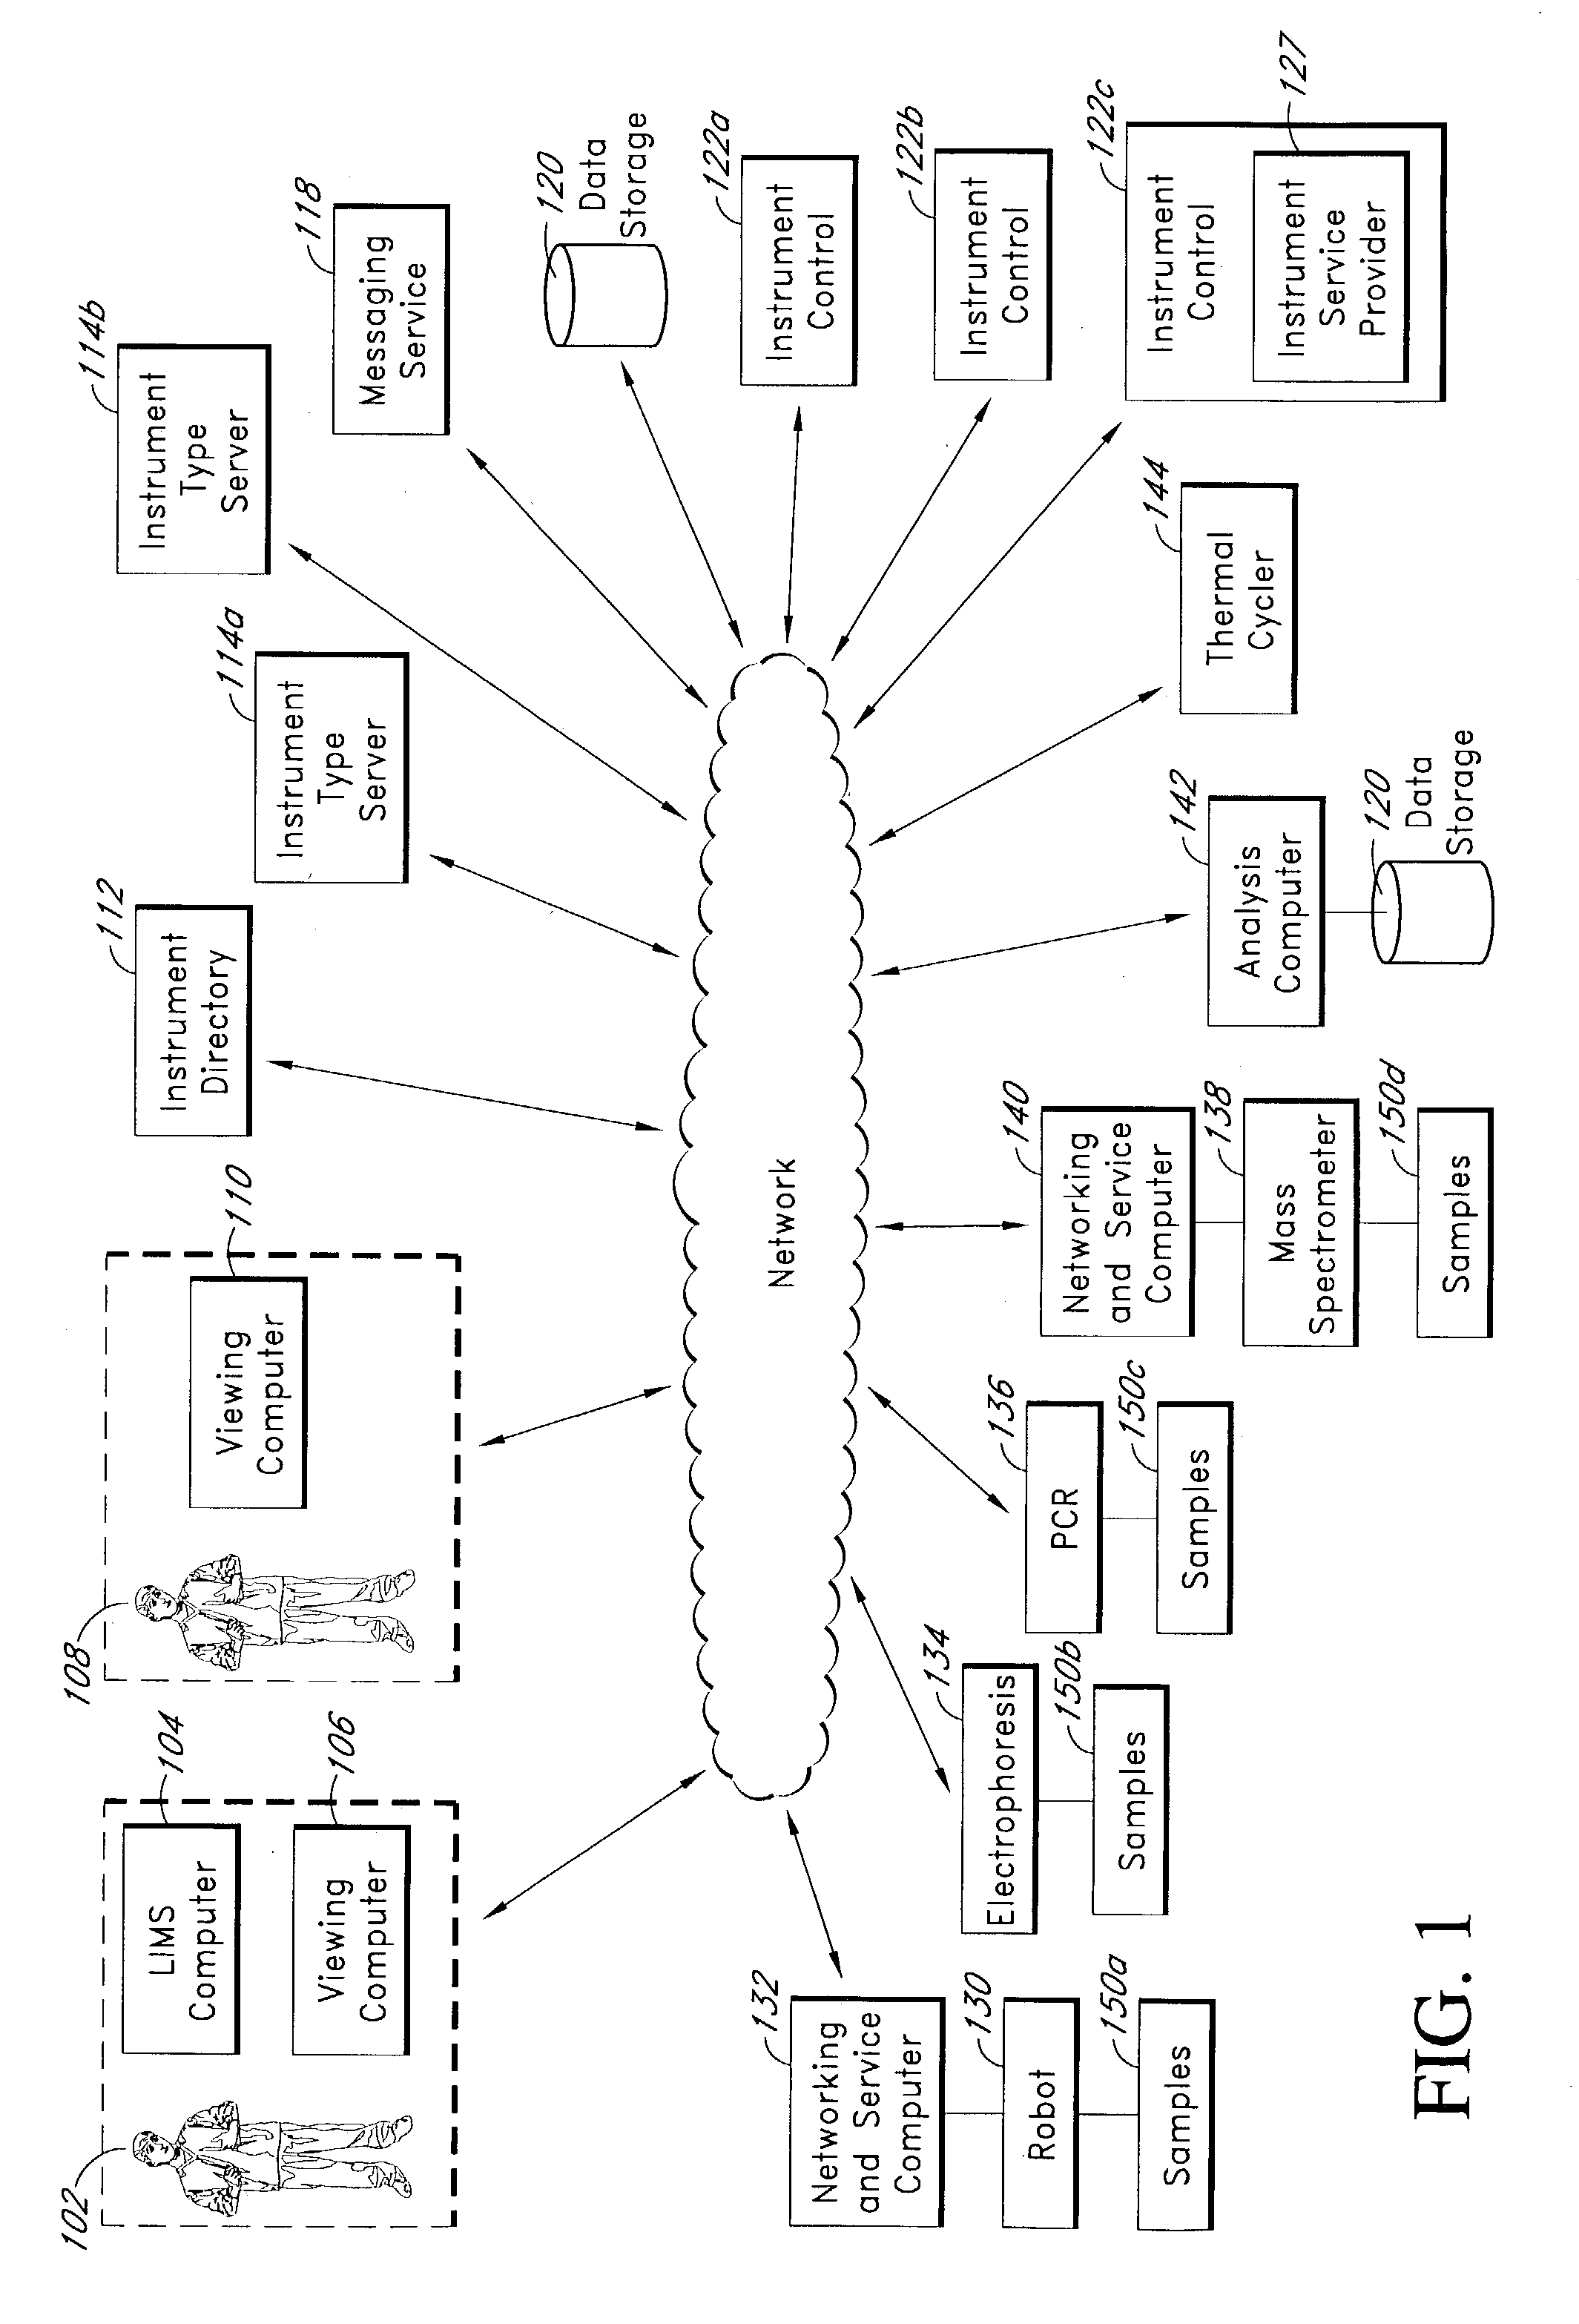 System and method for open control and monitoring of biological instruments